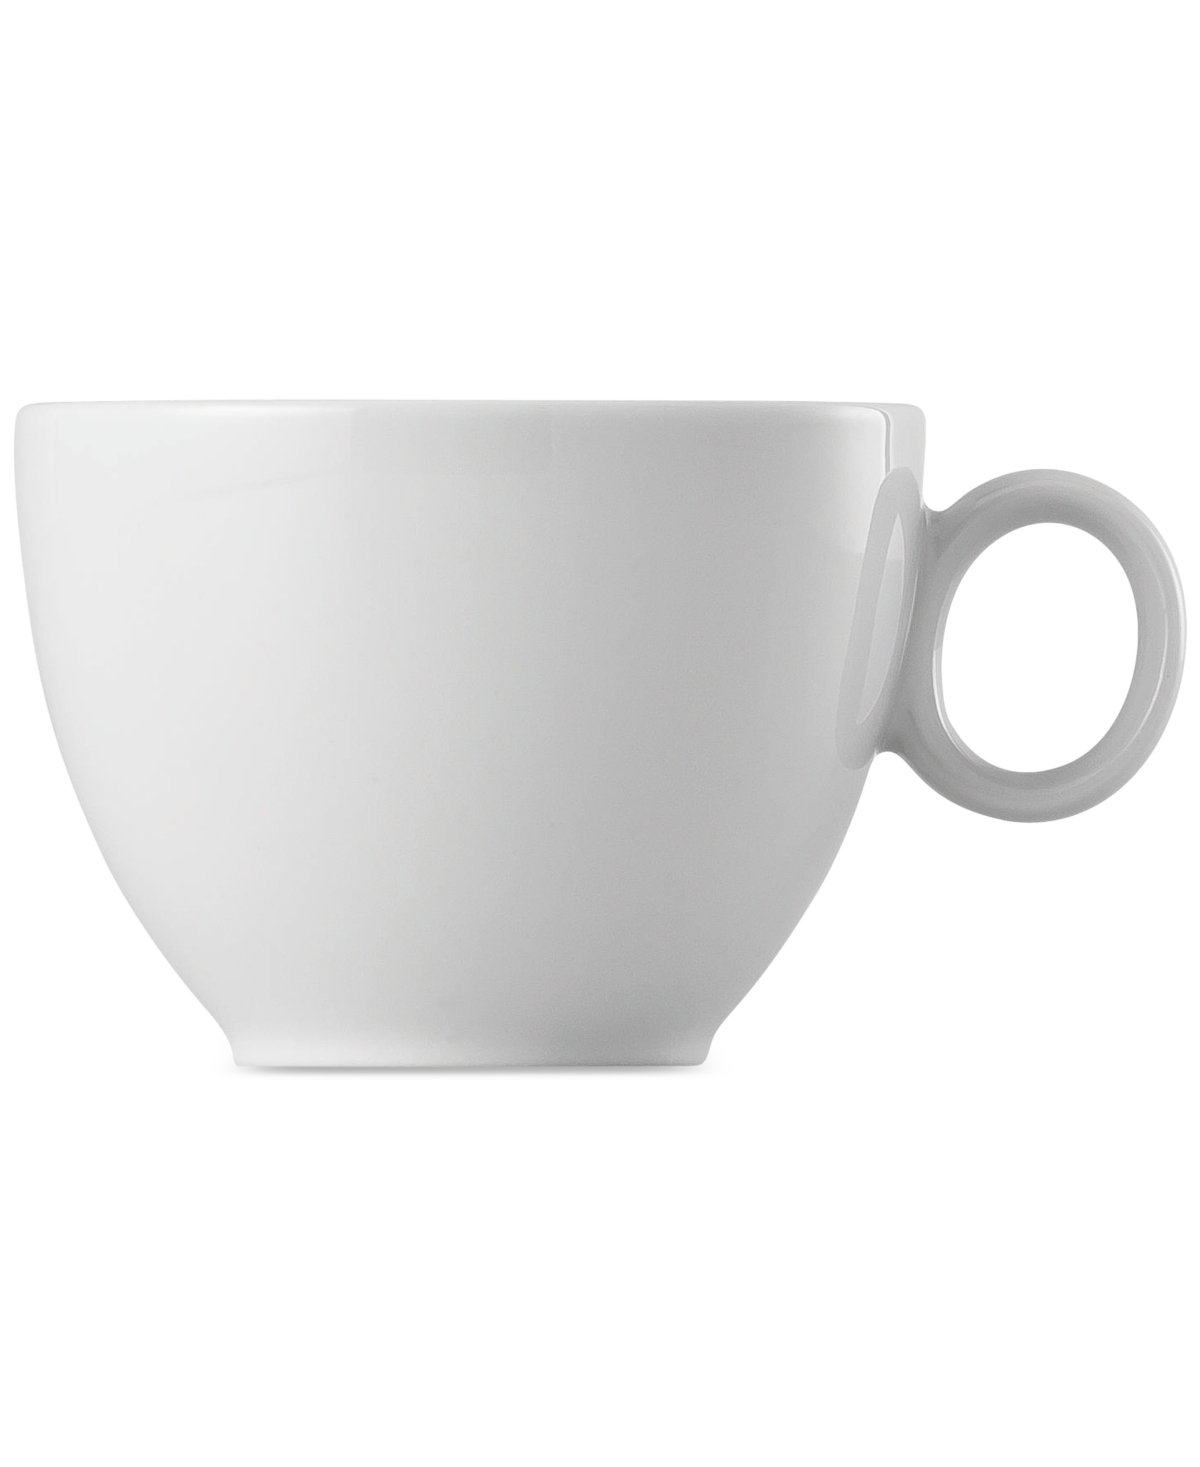 Thomas by Rosenthal Loft After Dinner Cup